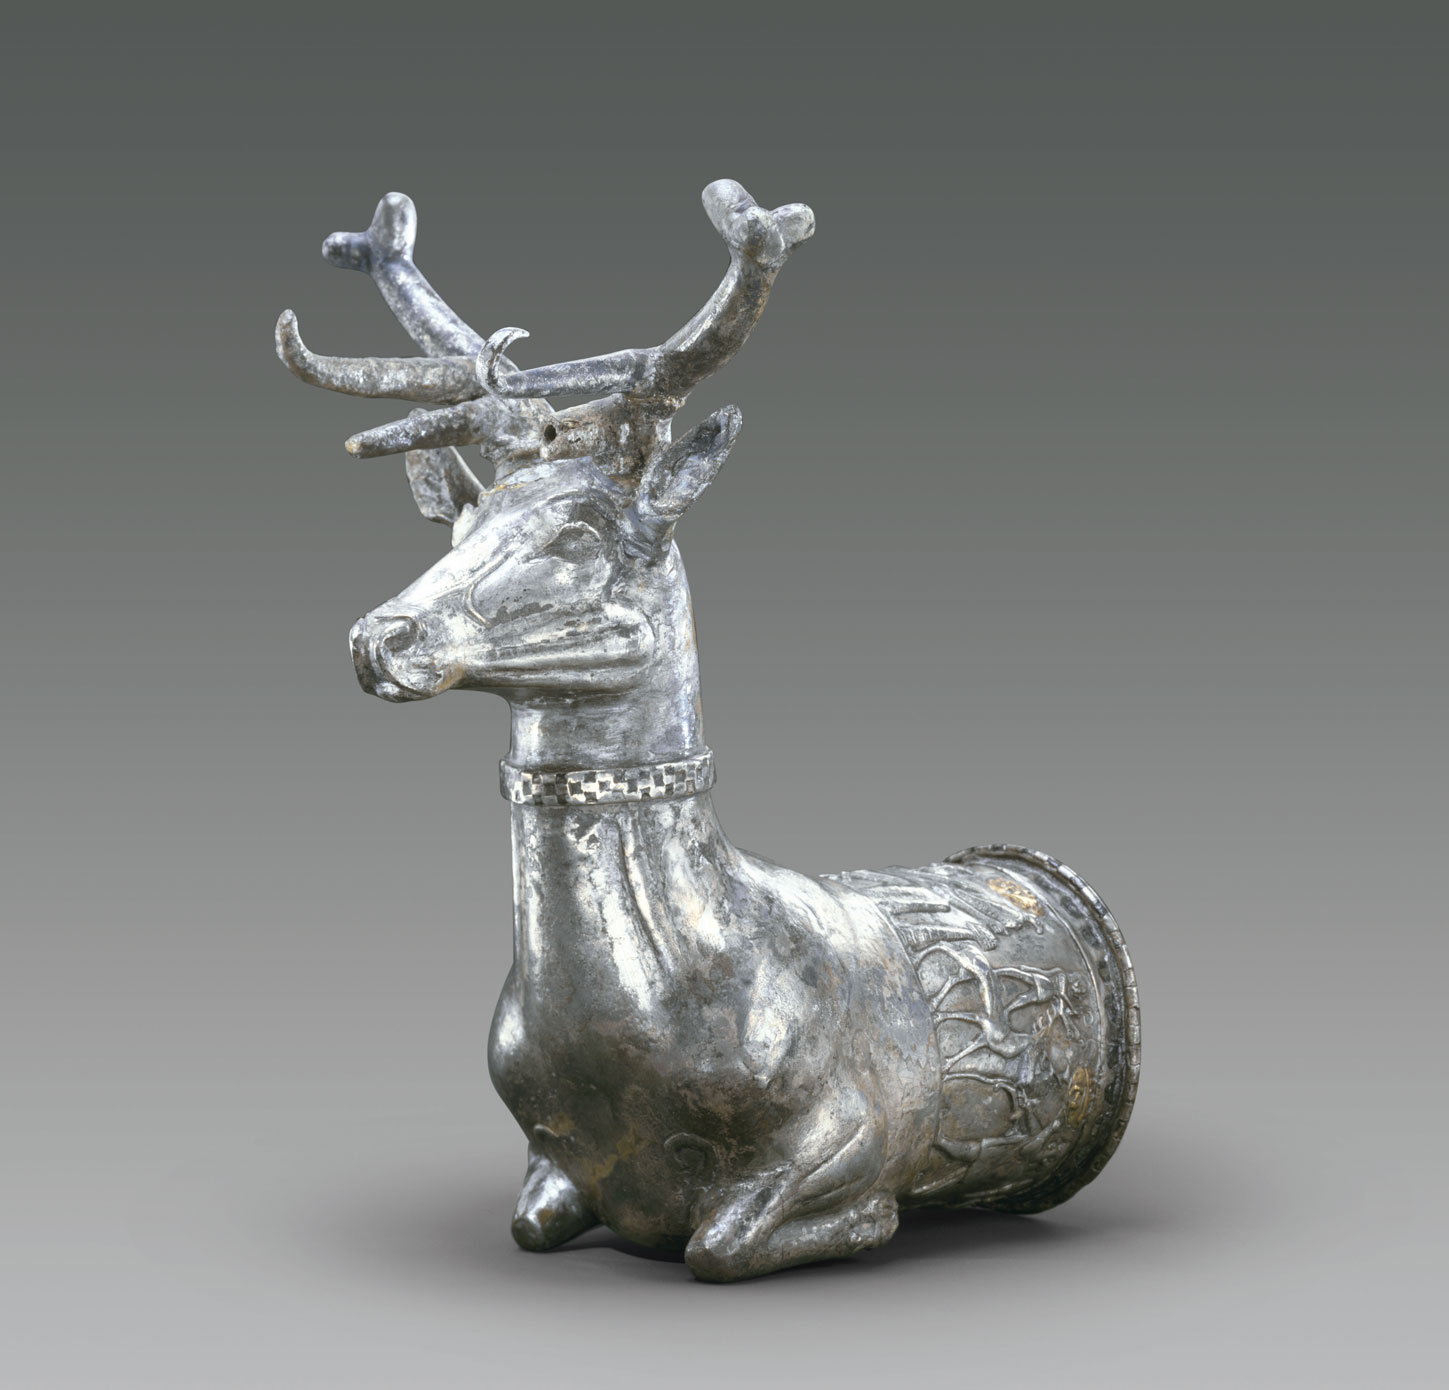 The silver vessel in the form of a stag (p.139, fig.9) is stunning, in part because it’s so old: it dates as early as the 14th century BC. From Art =